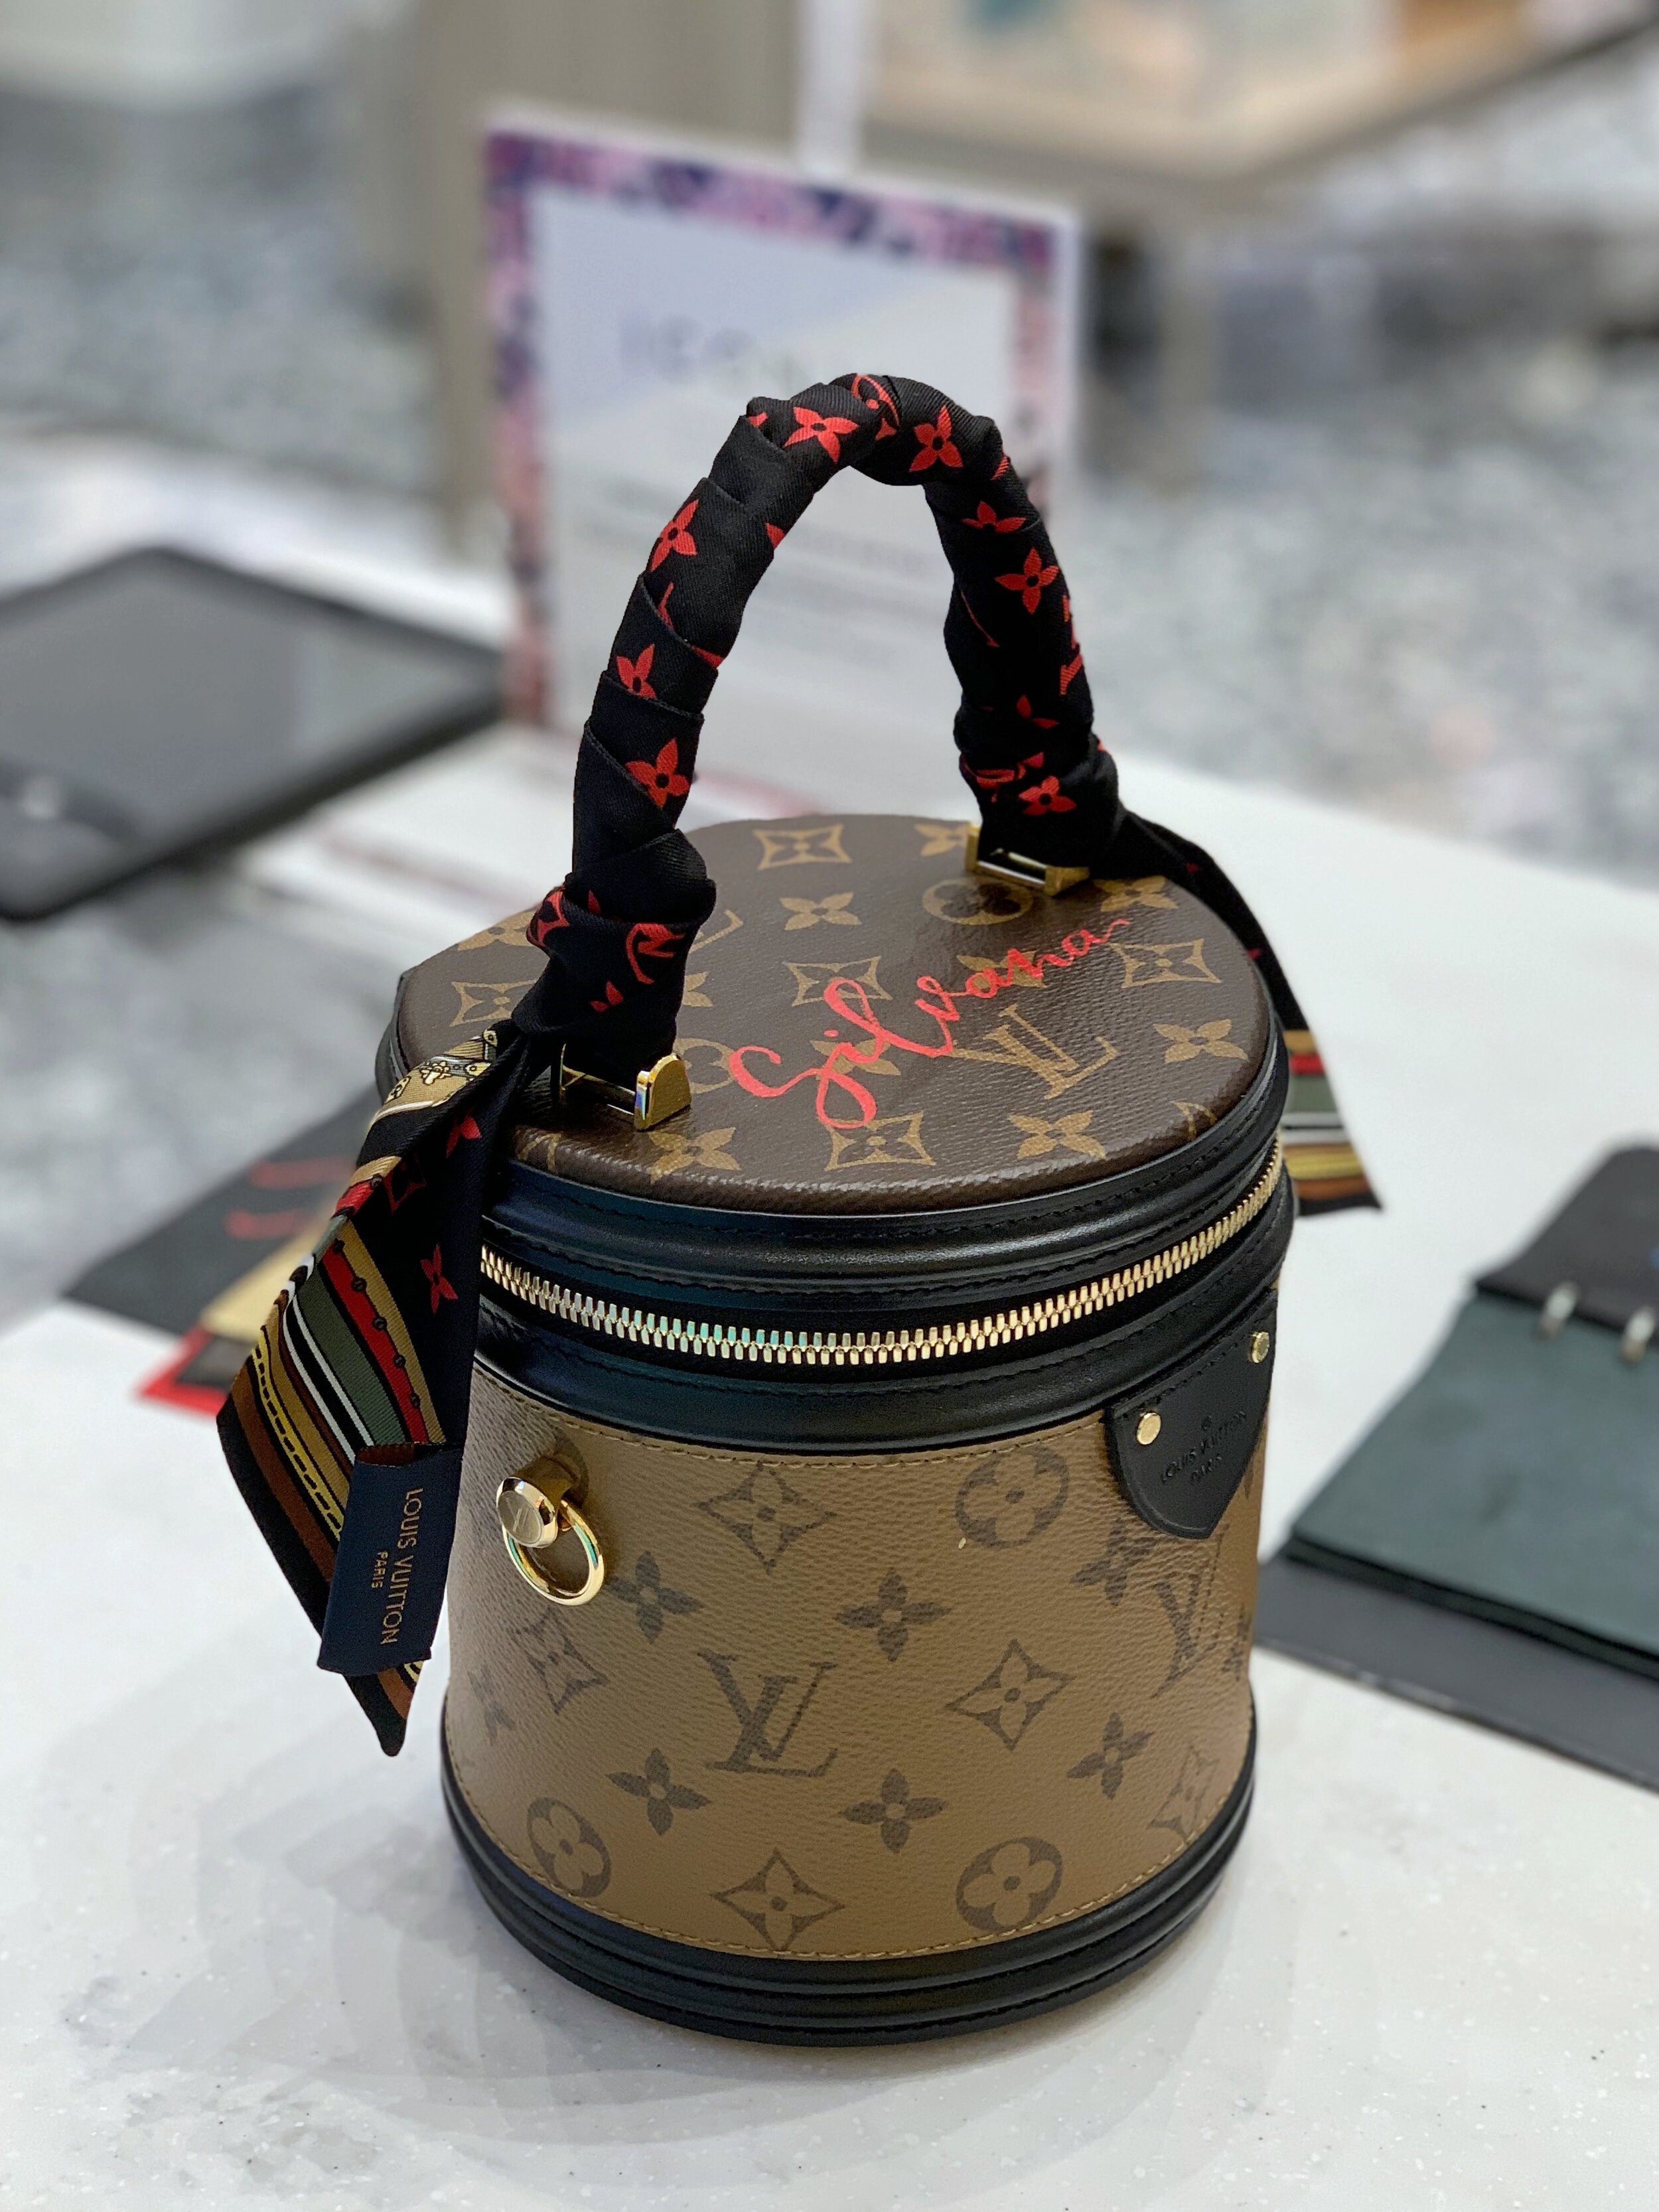 ZHC - Recently also painted this custom Louis Vuitton bag